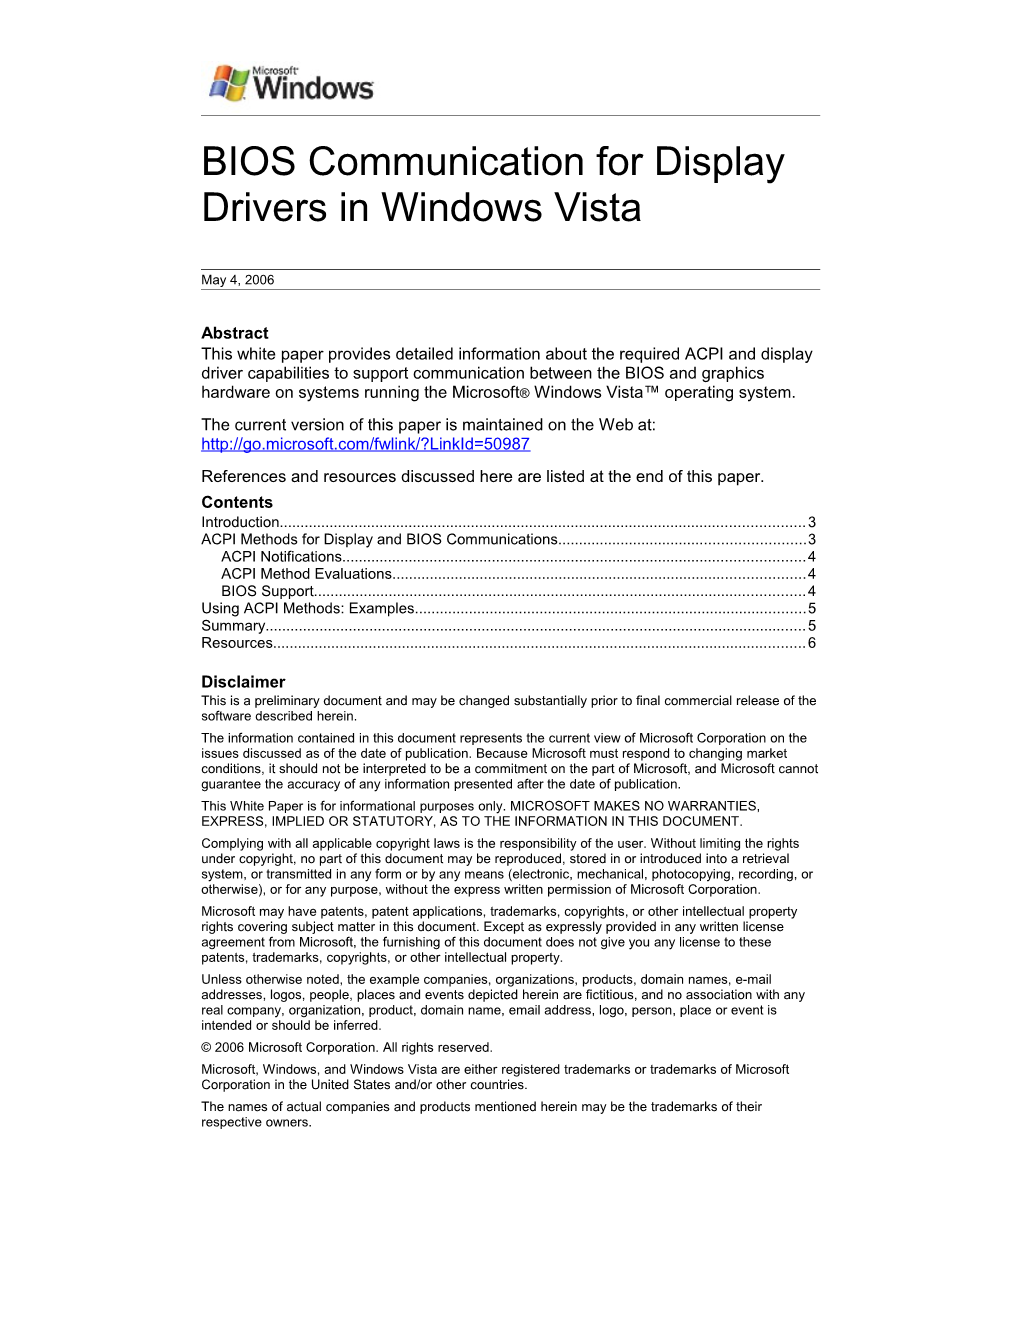 BIOS Communication For Display Drivers In Windows Vista